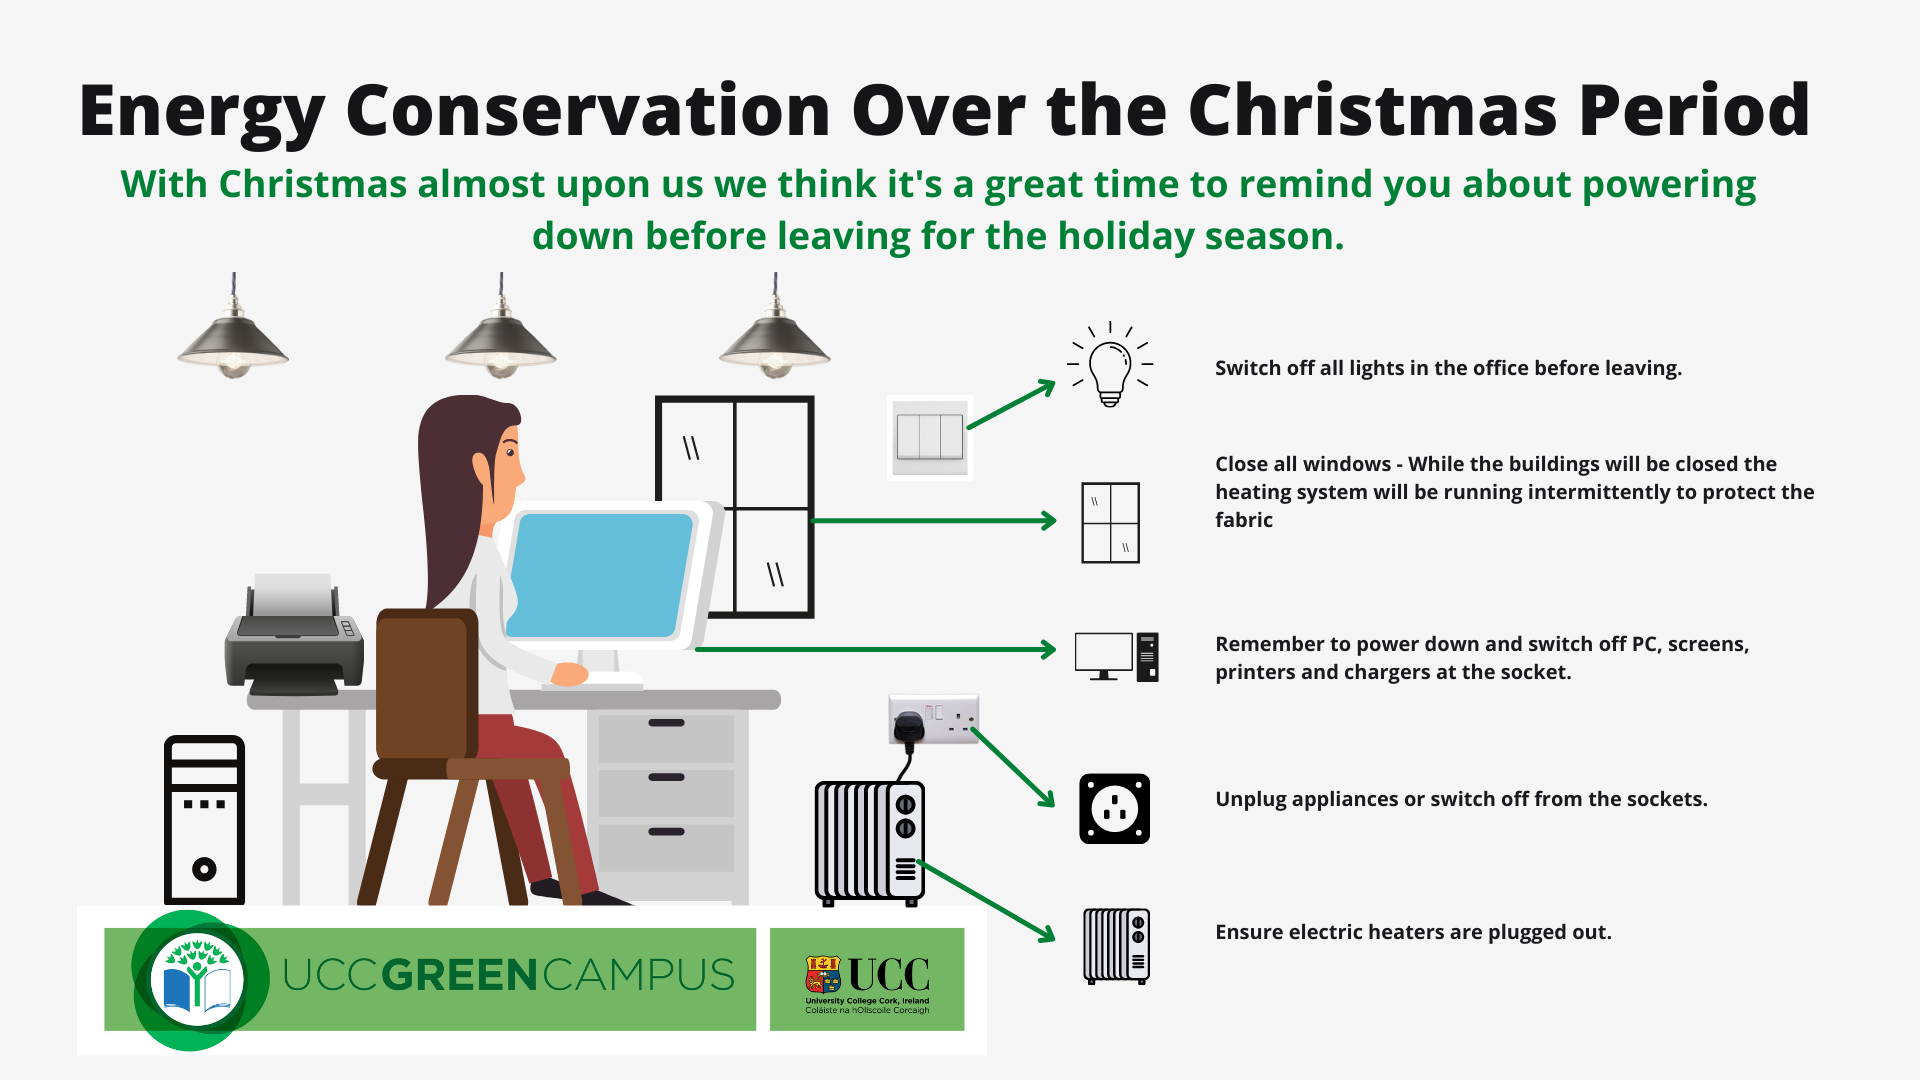 Energy Conservation over the Christmas period - Top Tips